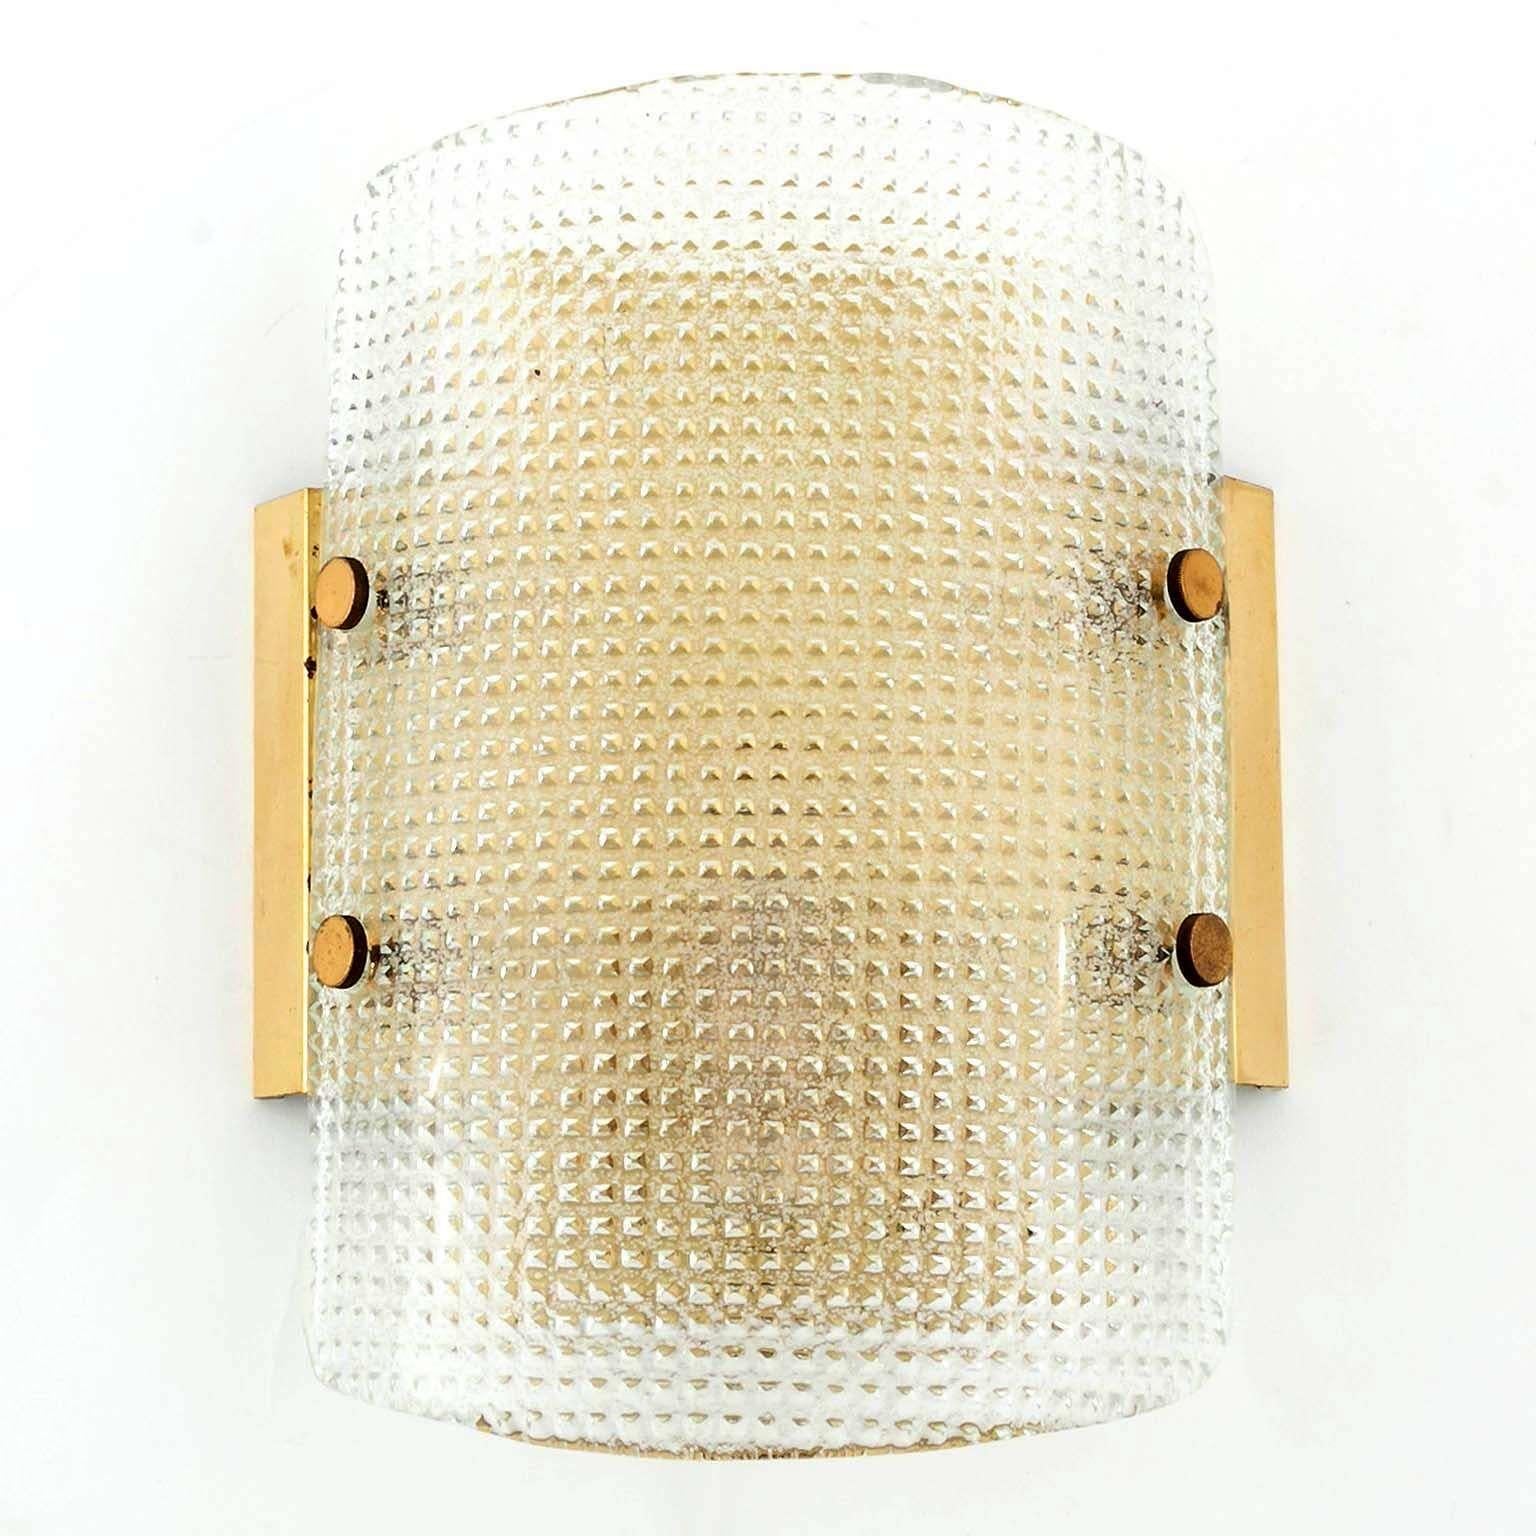 A pair of wonderful wall lamps by Hillebrand, Germany, manufactured in midcentury, circa 1970 (late 1960s or early 1970s). 
A textured glass with a grid pattern is mounted with brass bolts on a polished brass backplate. Each fixture has one socket